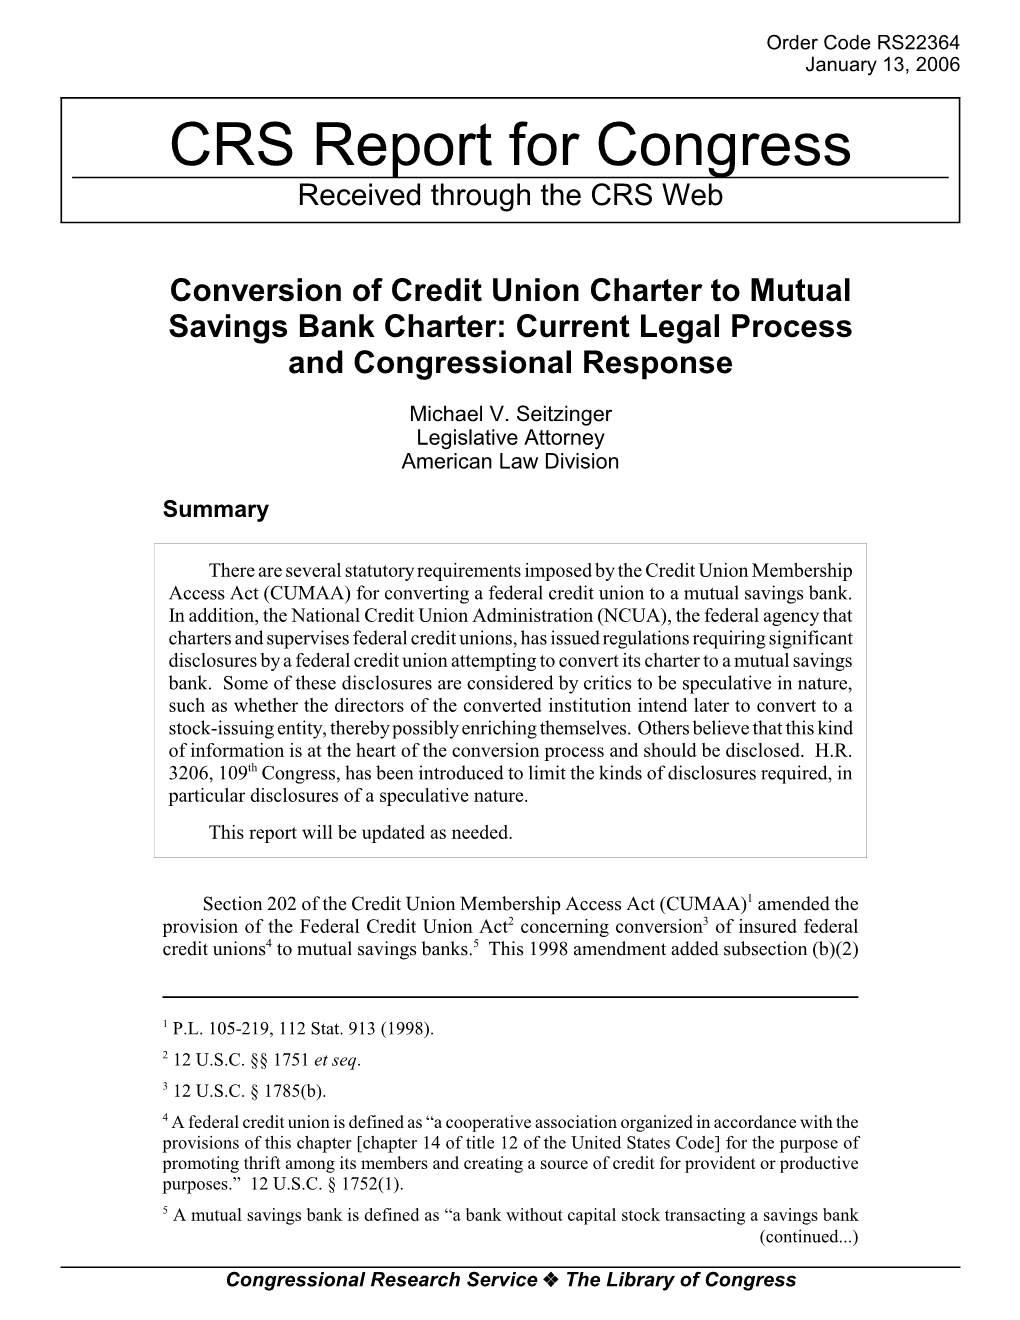 Conversion of Credit Union Charter to Mutual Savings Bank Charter: Current Legal Process and Congressional Response